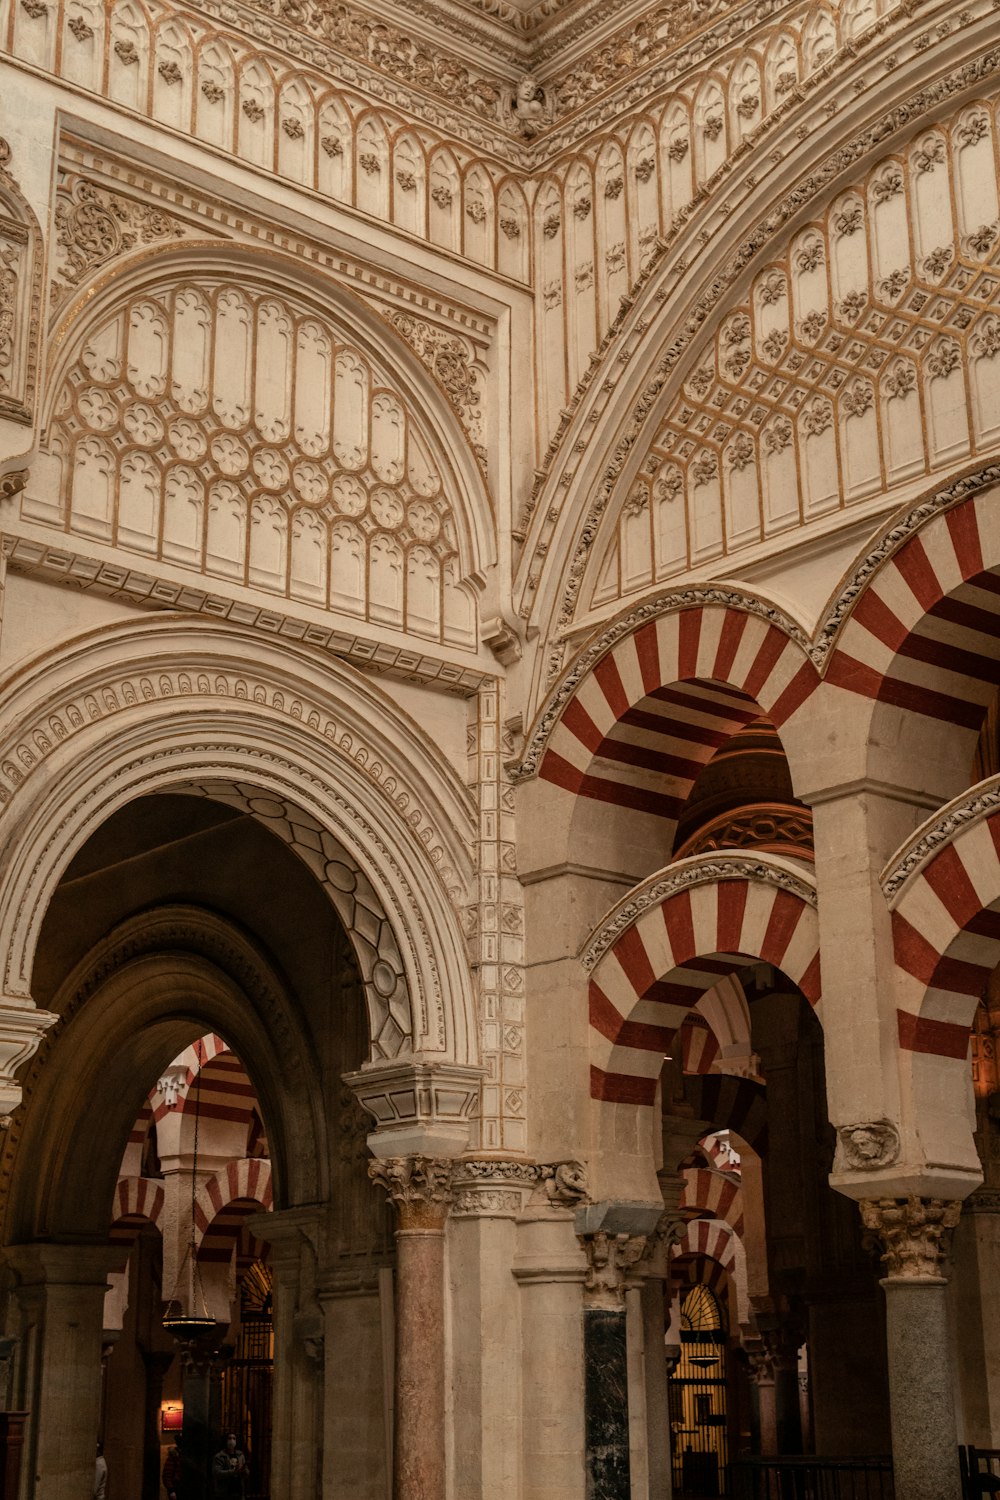 a large ornate building with arches